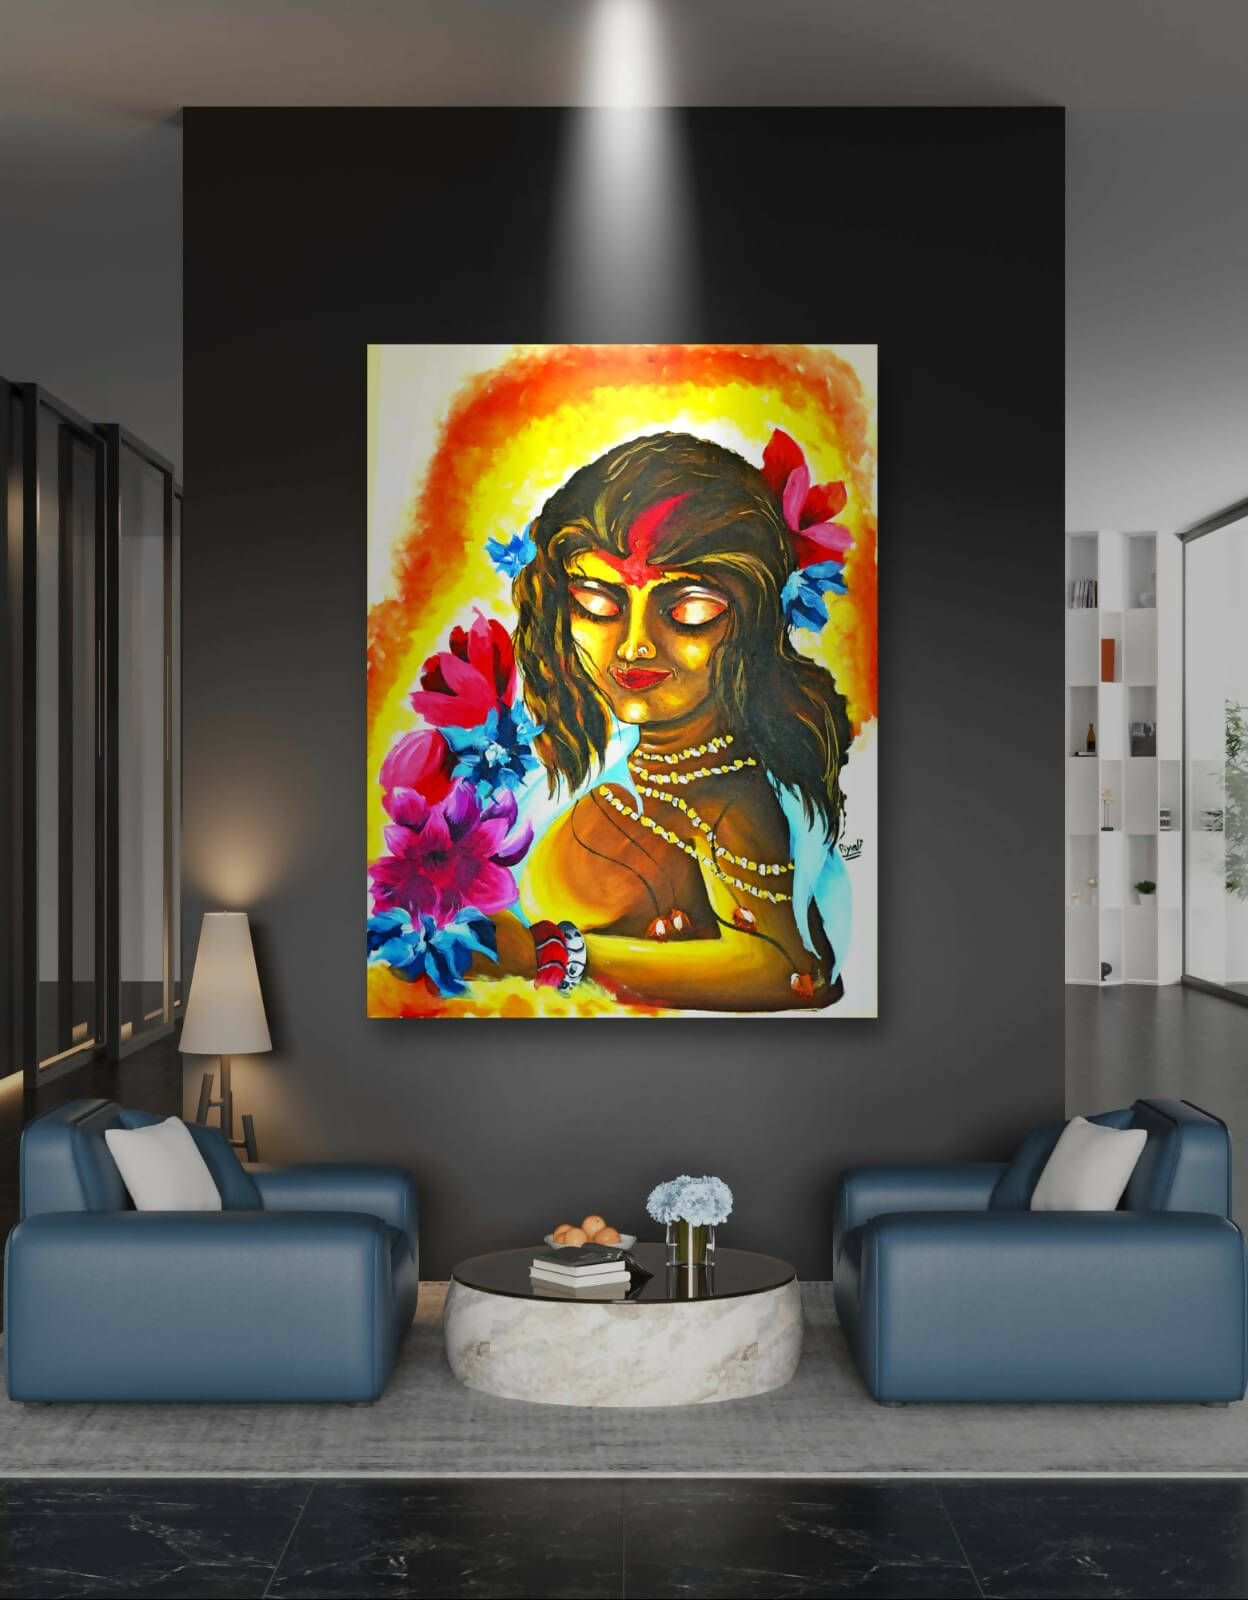 Ablaze with Love Bride Bride Portrait with Lotus Flowers Home Decor Wall Art 32x24 Inch Rolled Canvas Acrylic Painting Ablaze with Love amazon handmade decor